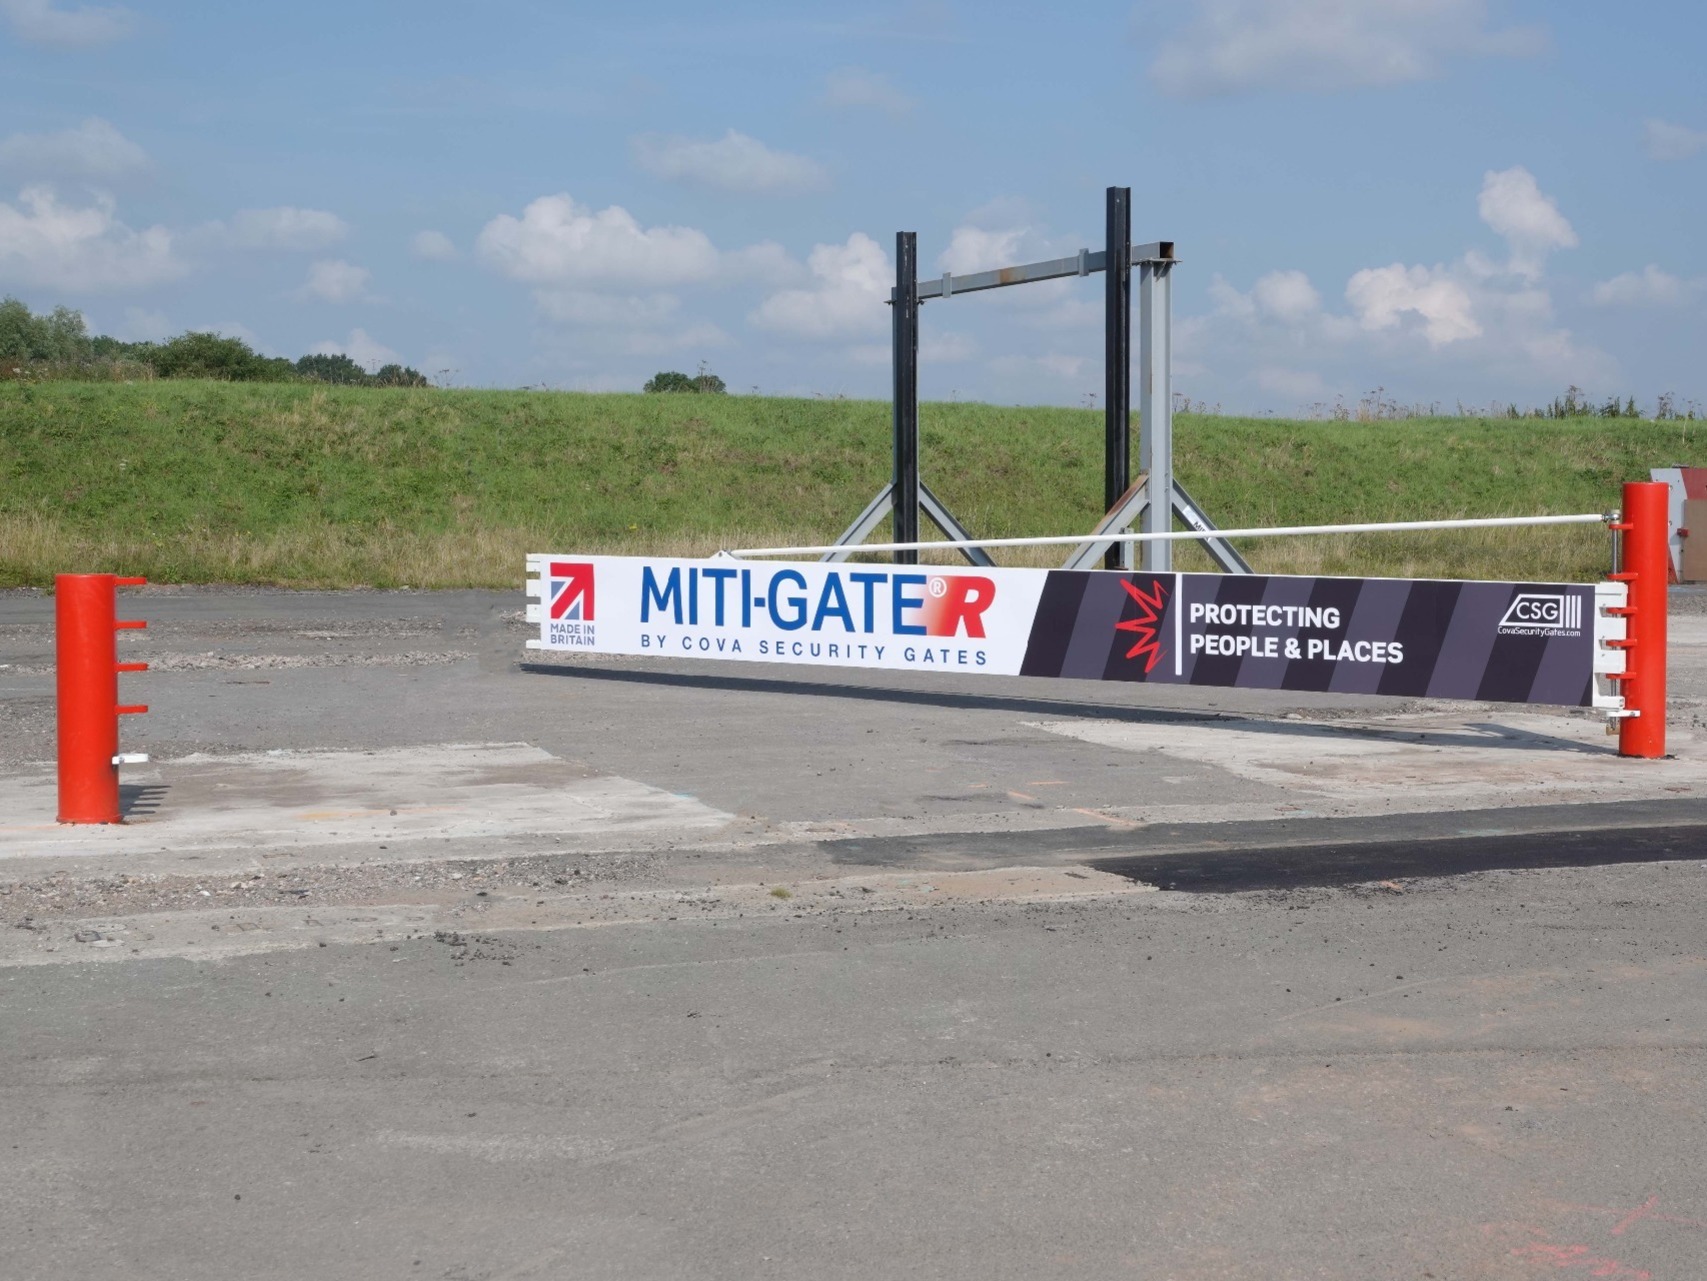 Miti-gate®R - Manual Swing Barrier - Easy to open & close